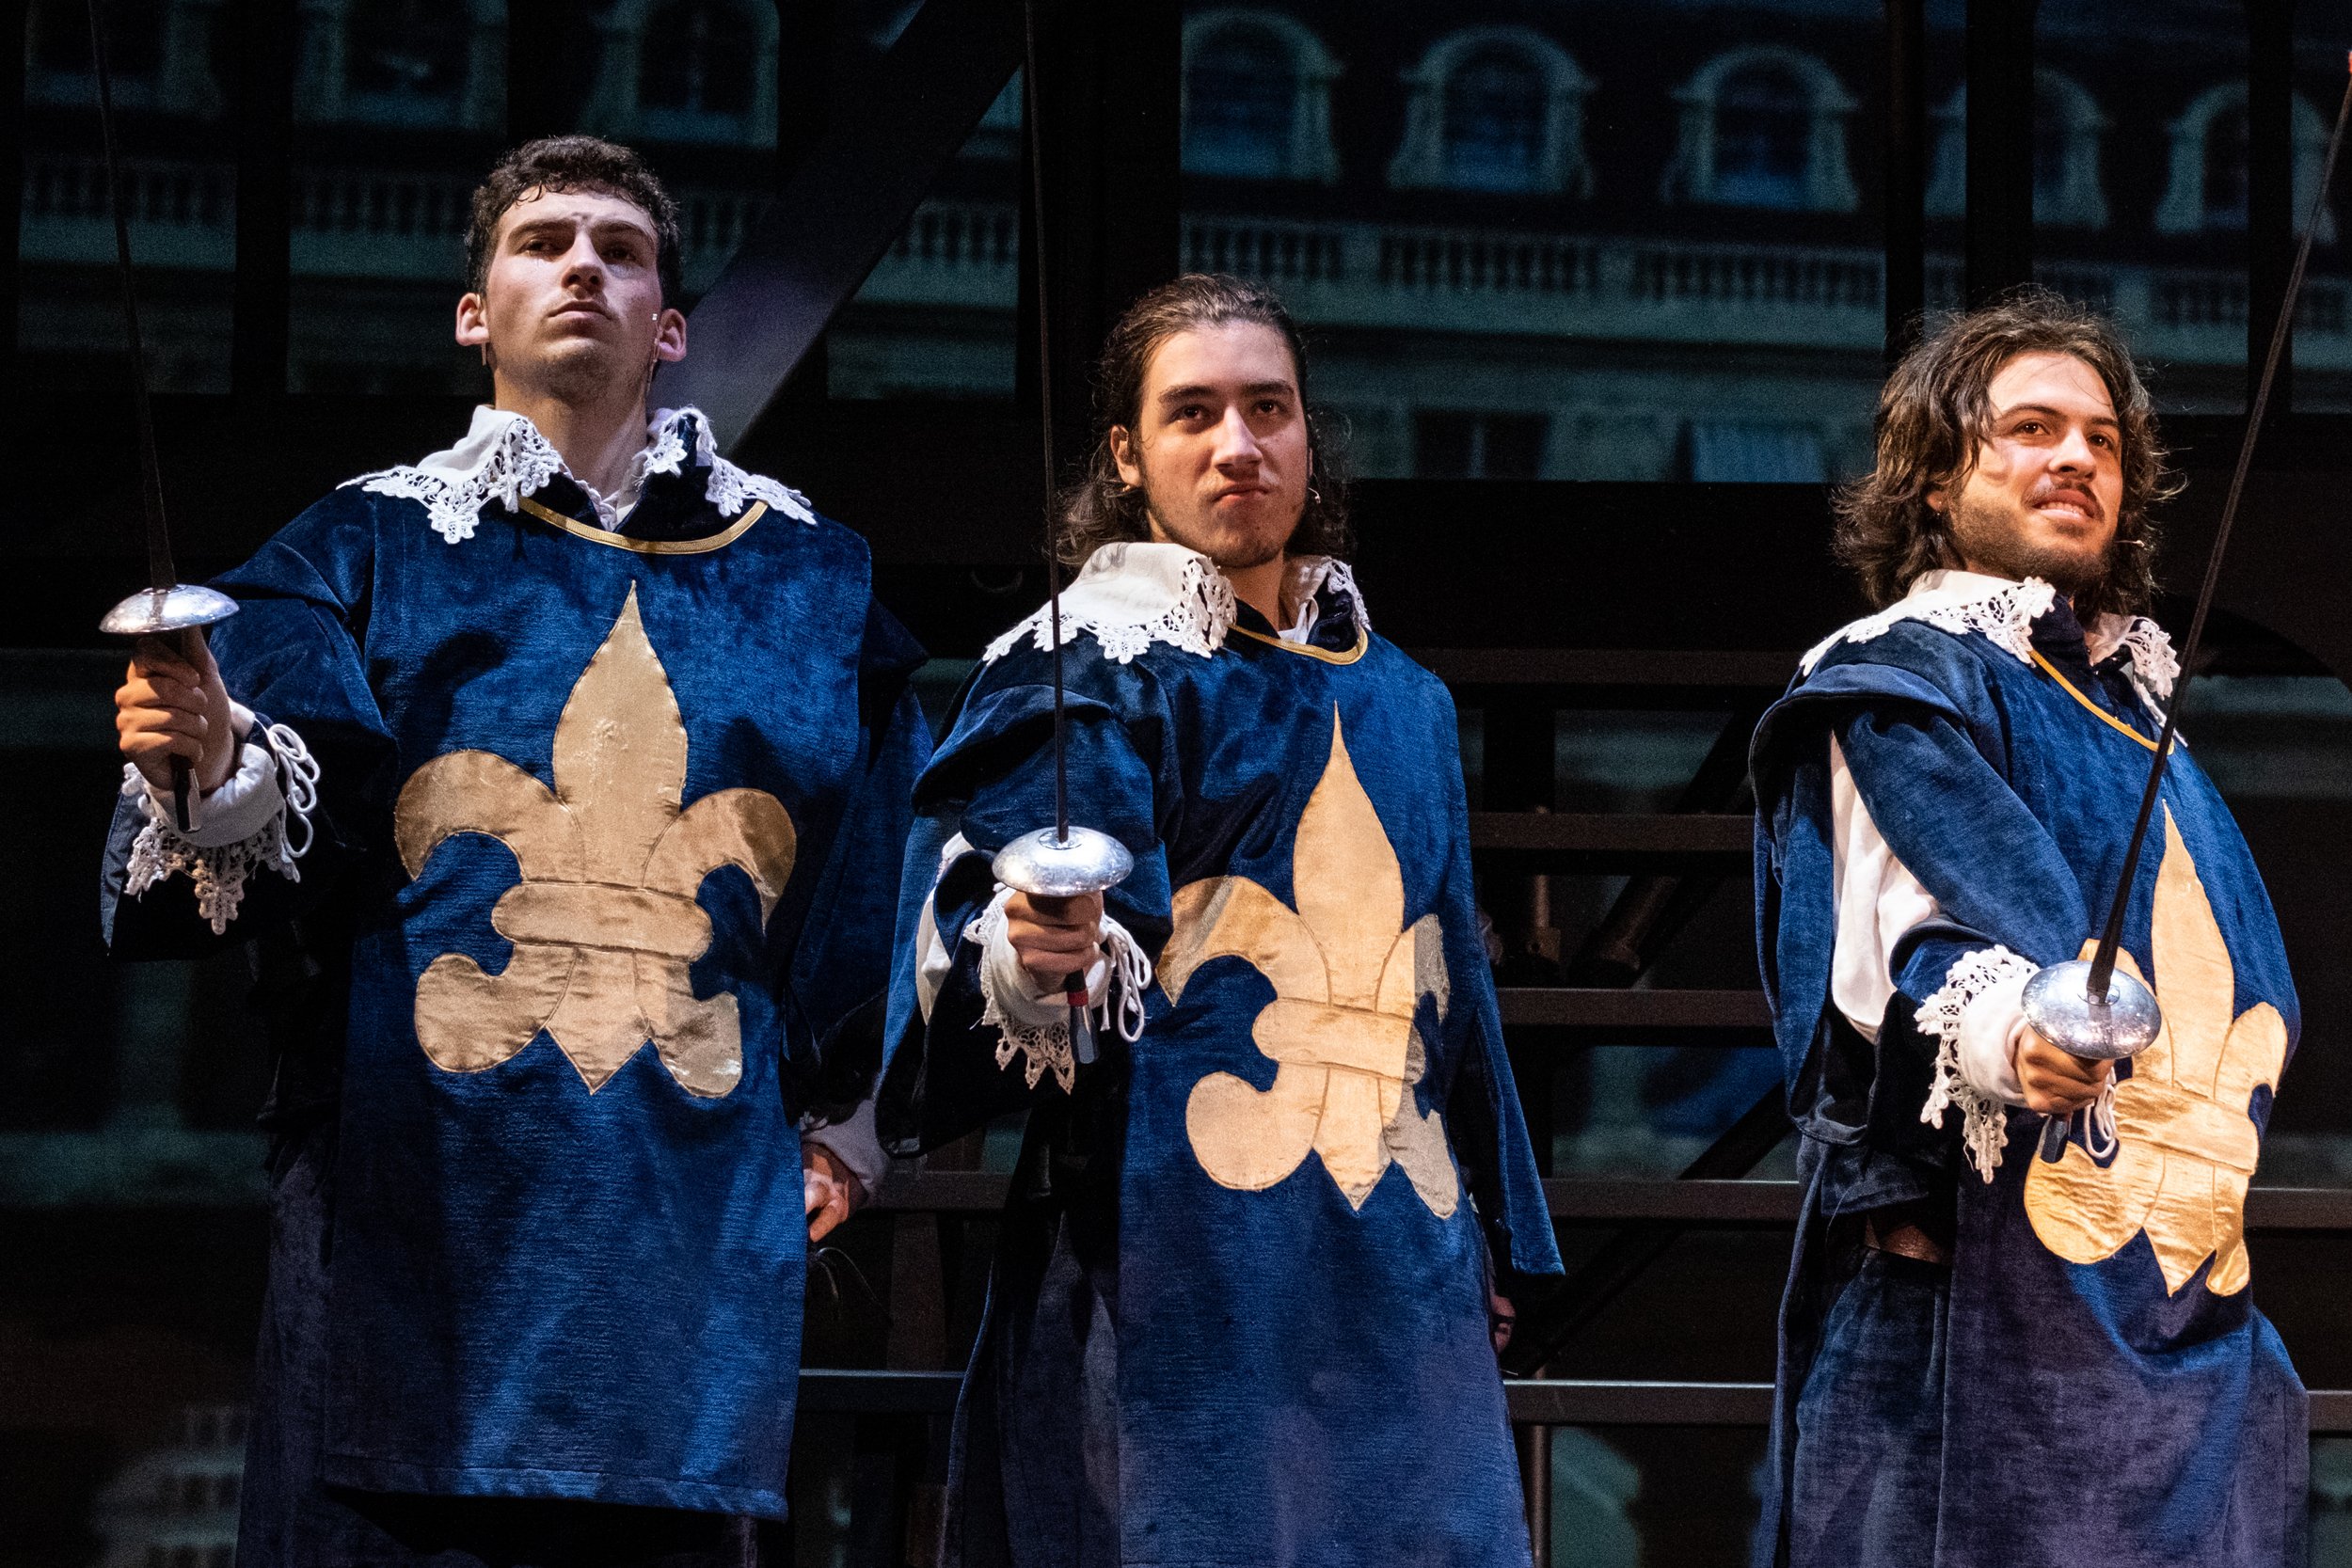  From L to R, the three Musketeers, Porthos, Athos, and Aramis, played by Alex Cole, Simon Oviedo and Keelin Jayne, respectively, on stage at the Santa Monica College Theater Department Main Stage on the Main Campus in Santa Monica, Calif. during the